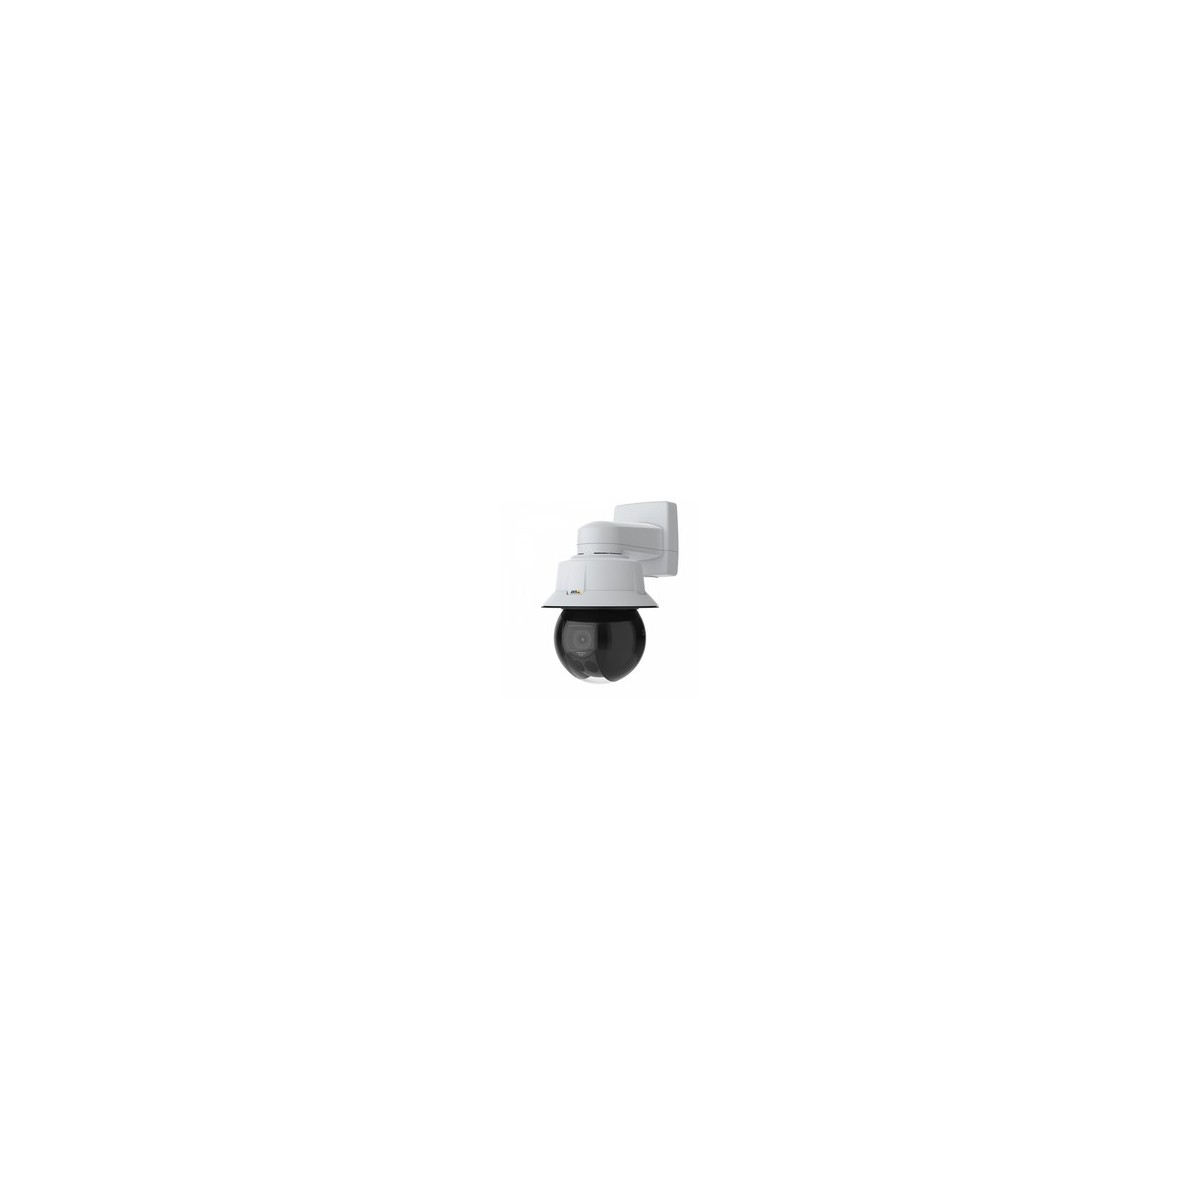 Axis 02446-002 - IP security camera - Outdoor - Wired - ARTPEC-7 - Simplified Chinese - Traditional Chinese - Czech - German - D